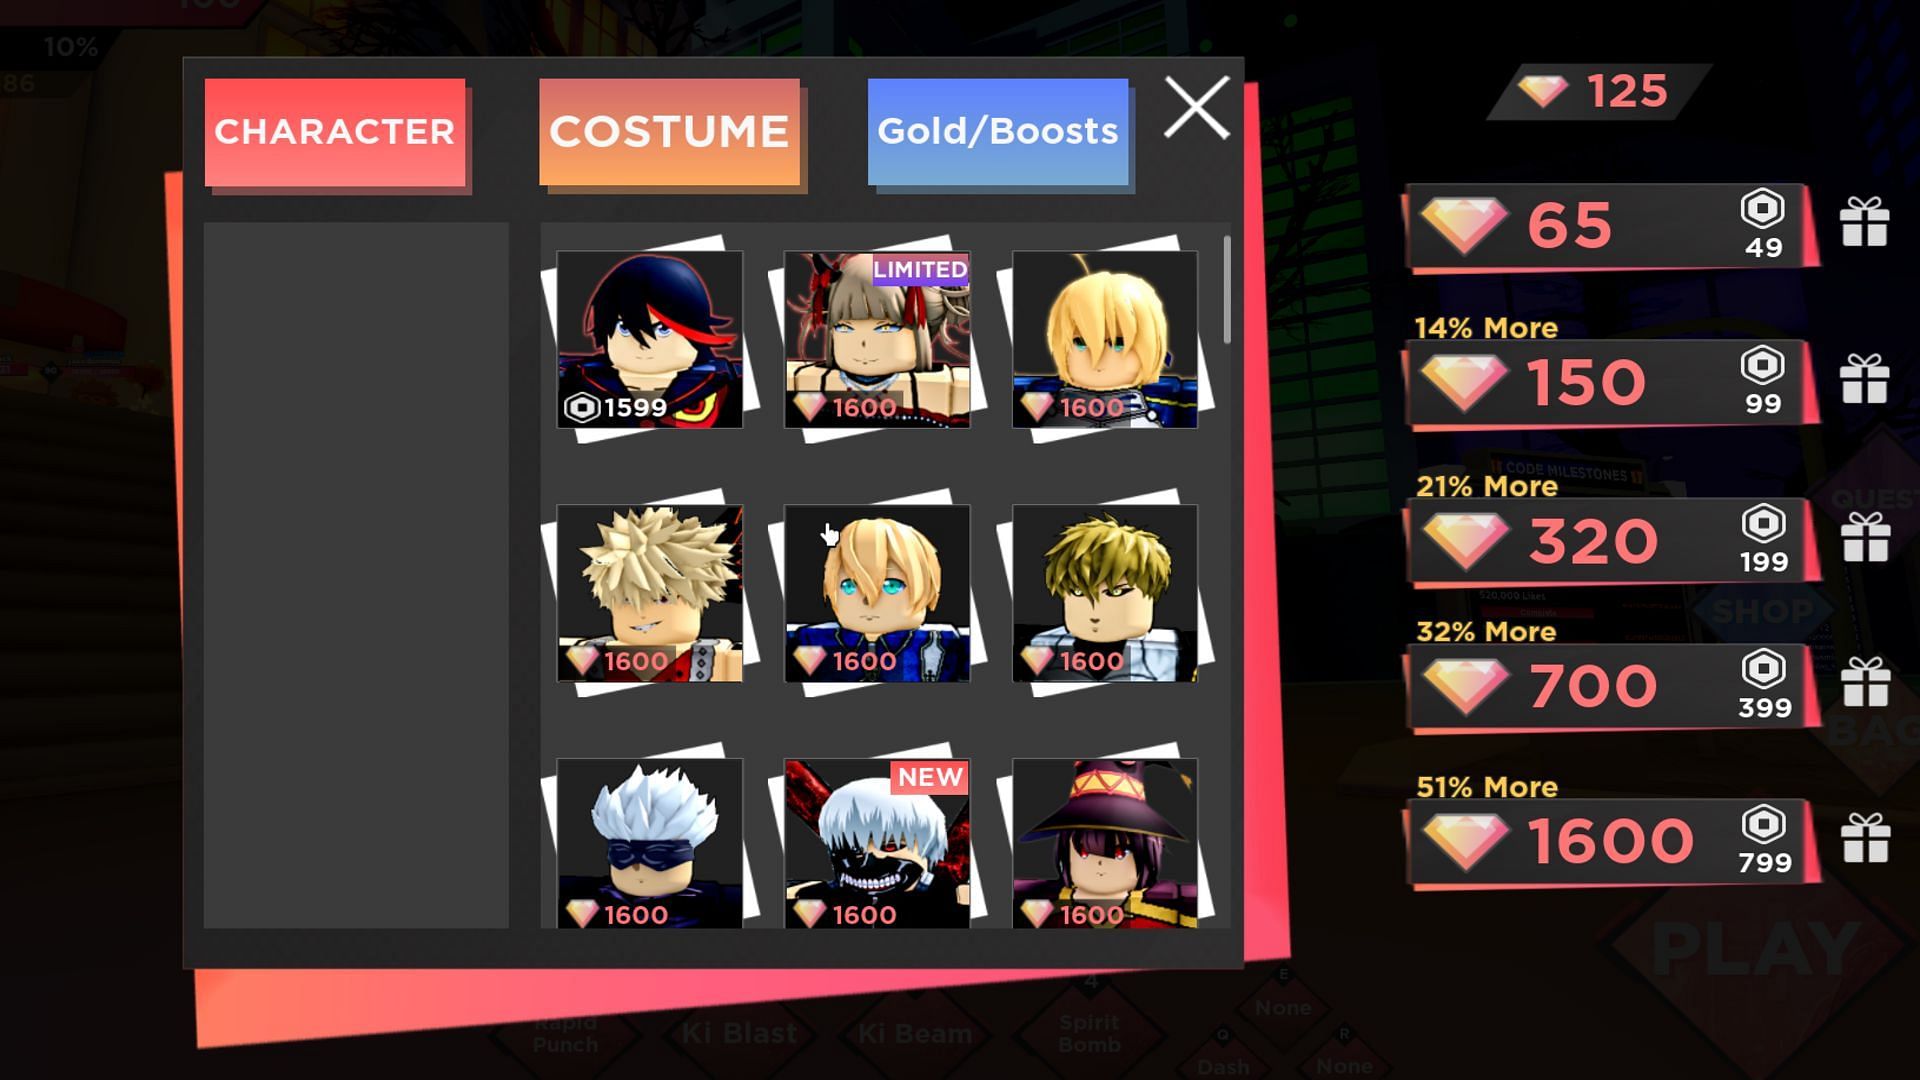 New Anime Dimensions characters can bought from the shop. (Image via Roblox)